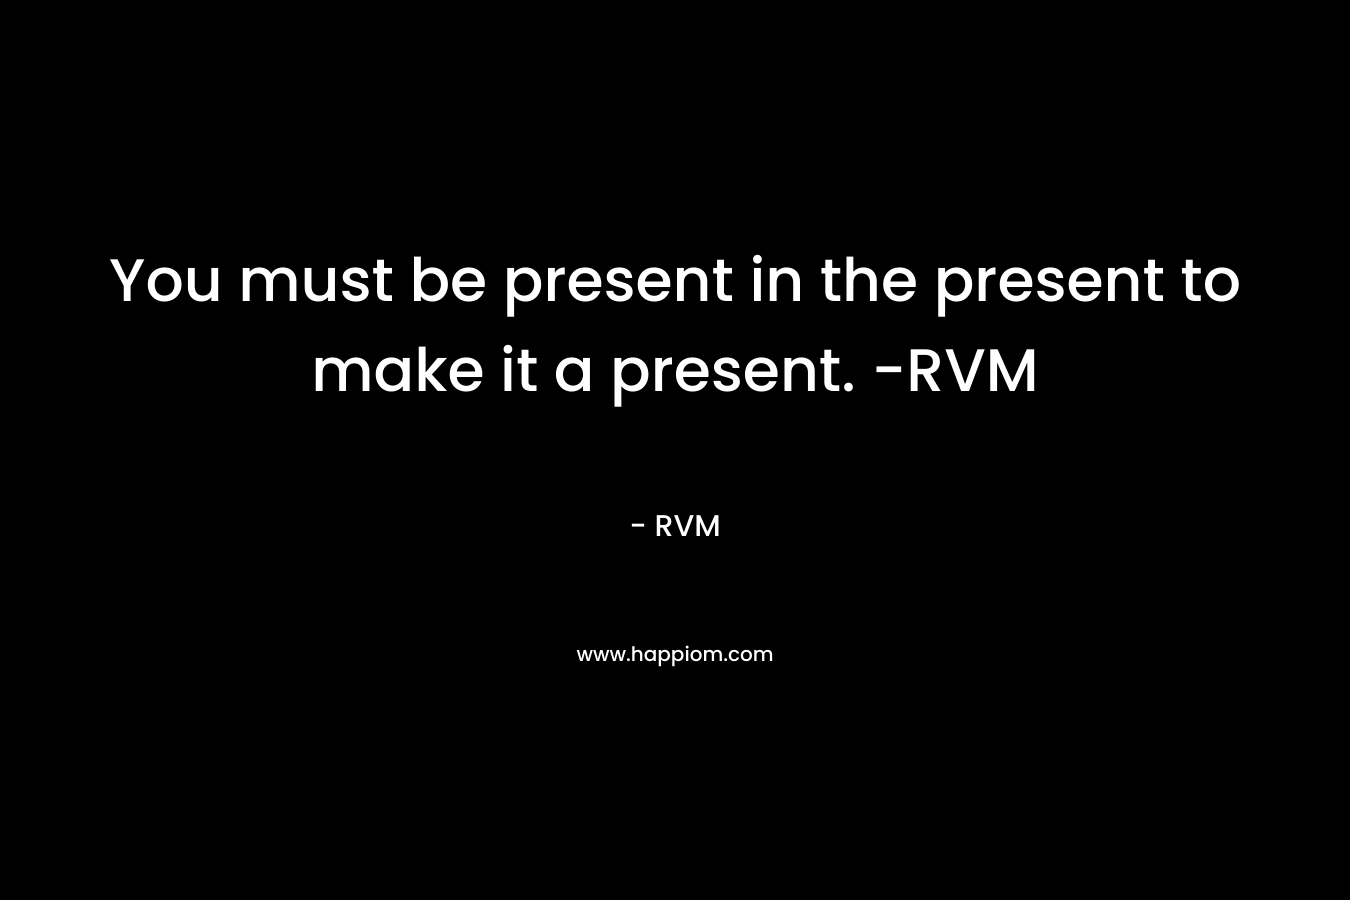 You must be present in the present to make it a present. -RVM